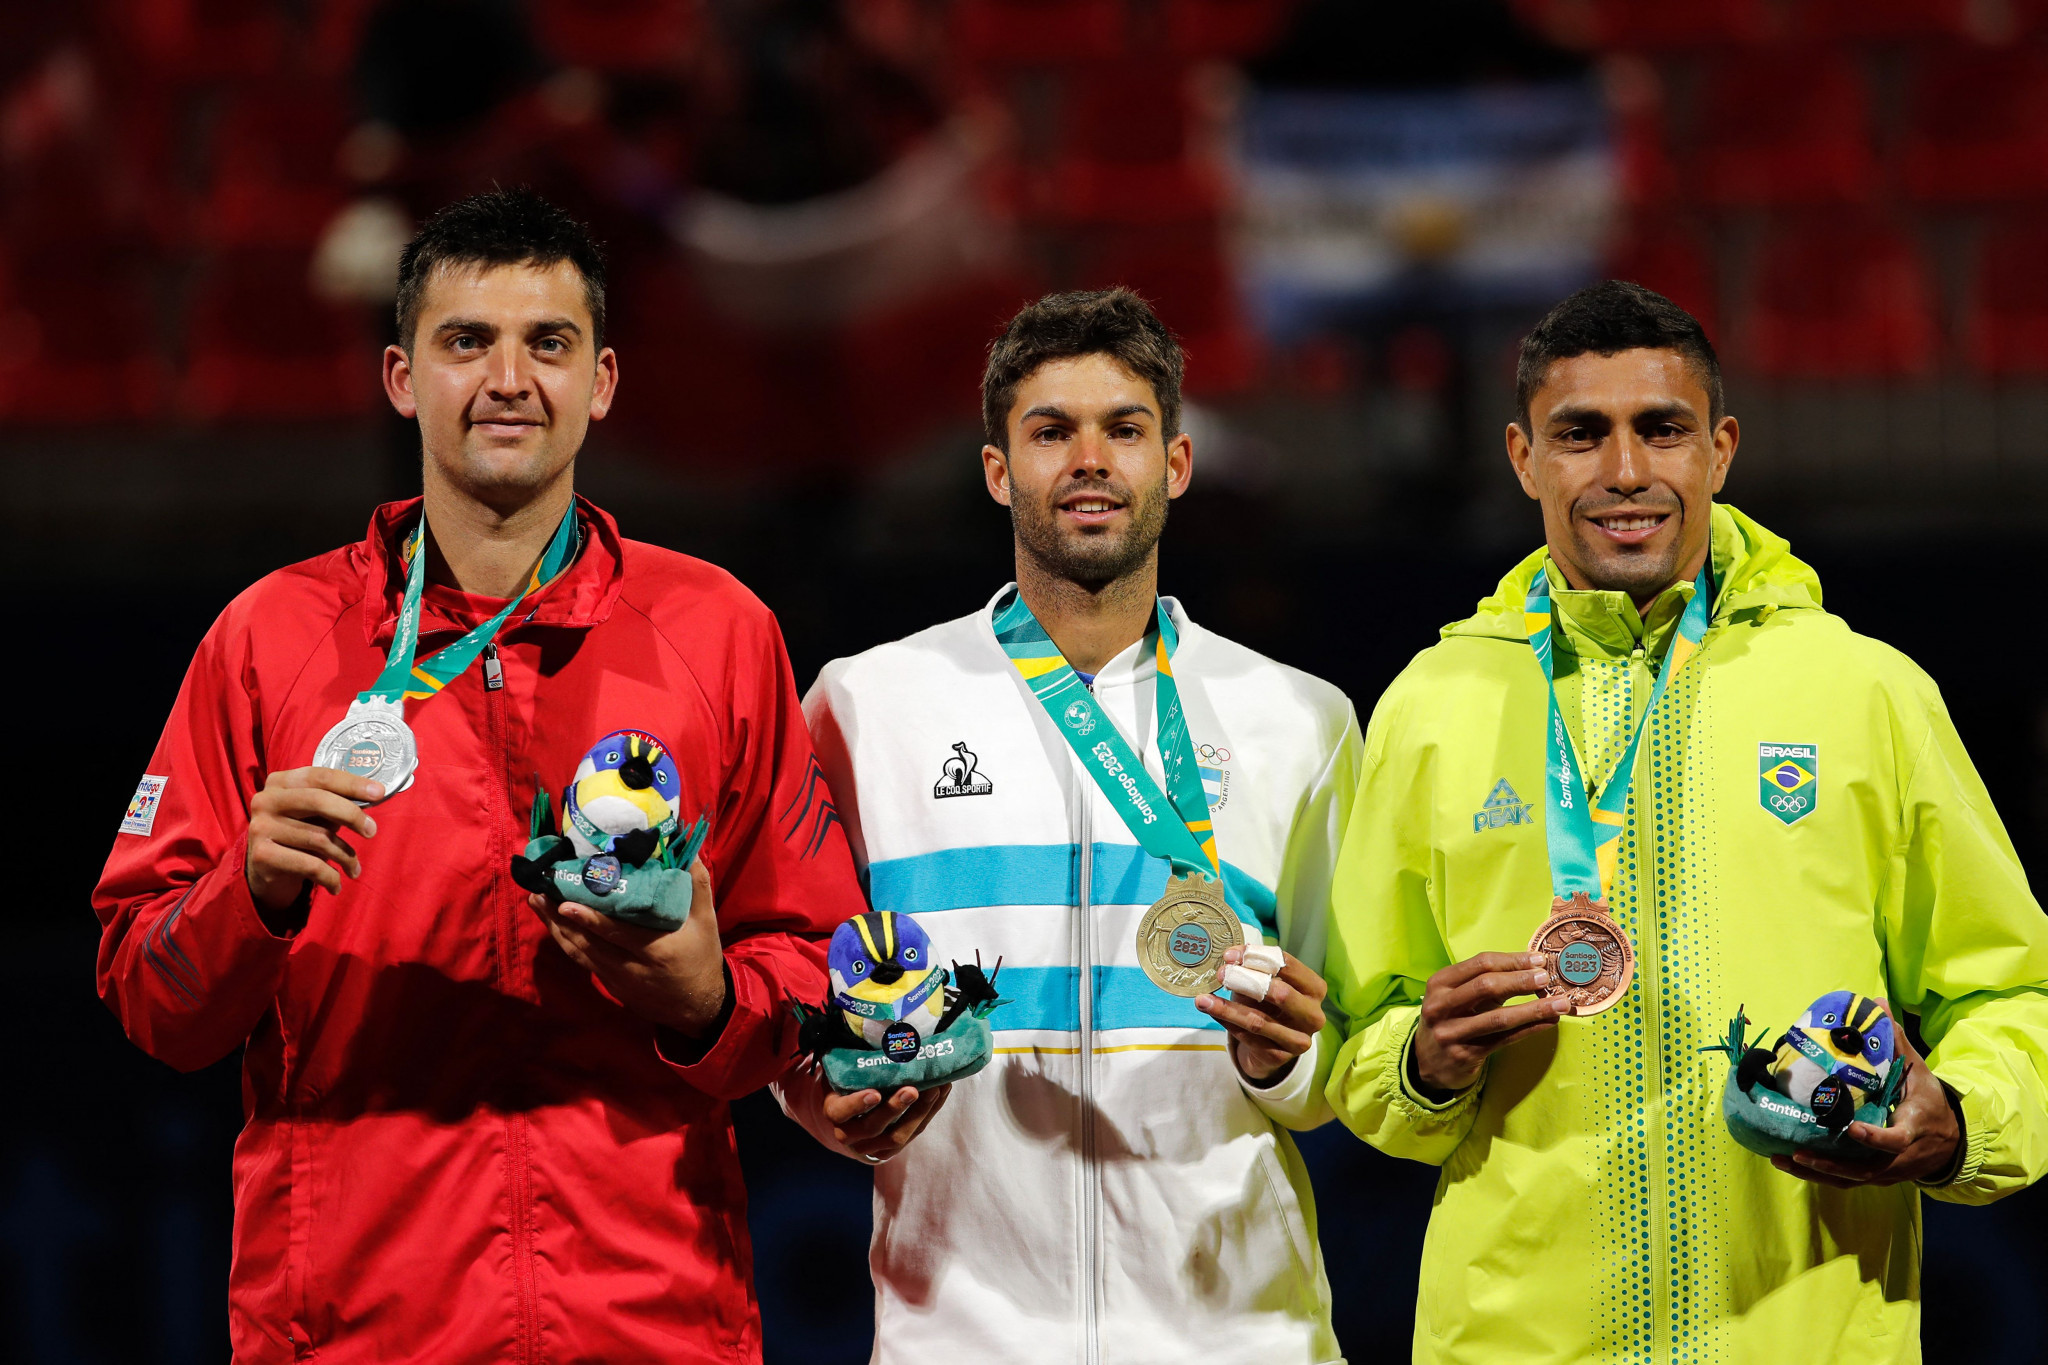 Thiago Monteiro of Brazil won bronze after coming out on top against compatriot Gustavo Heide ©Getty Images